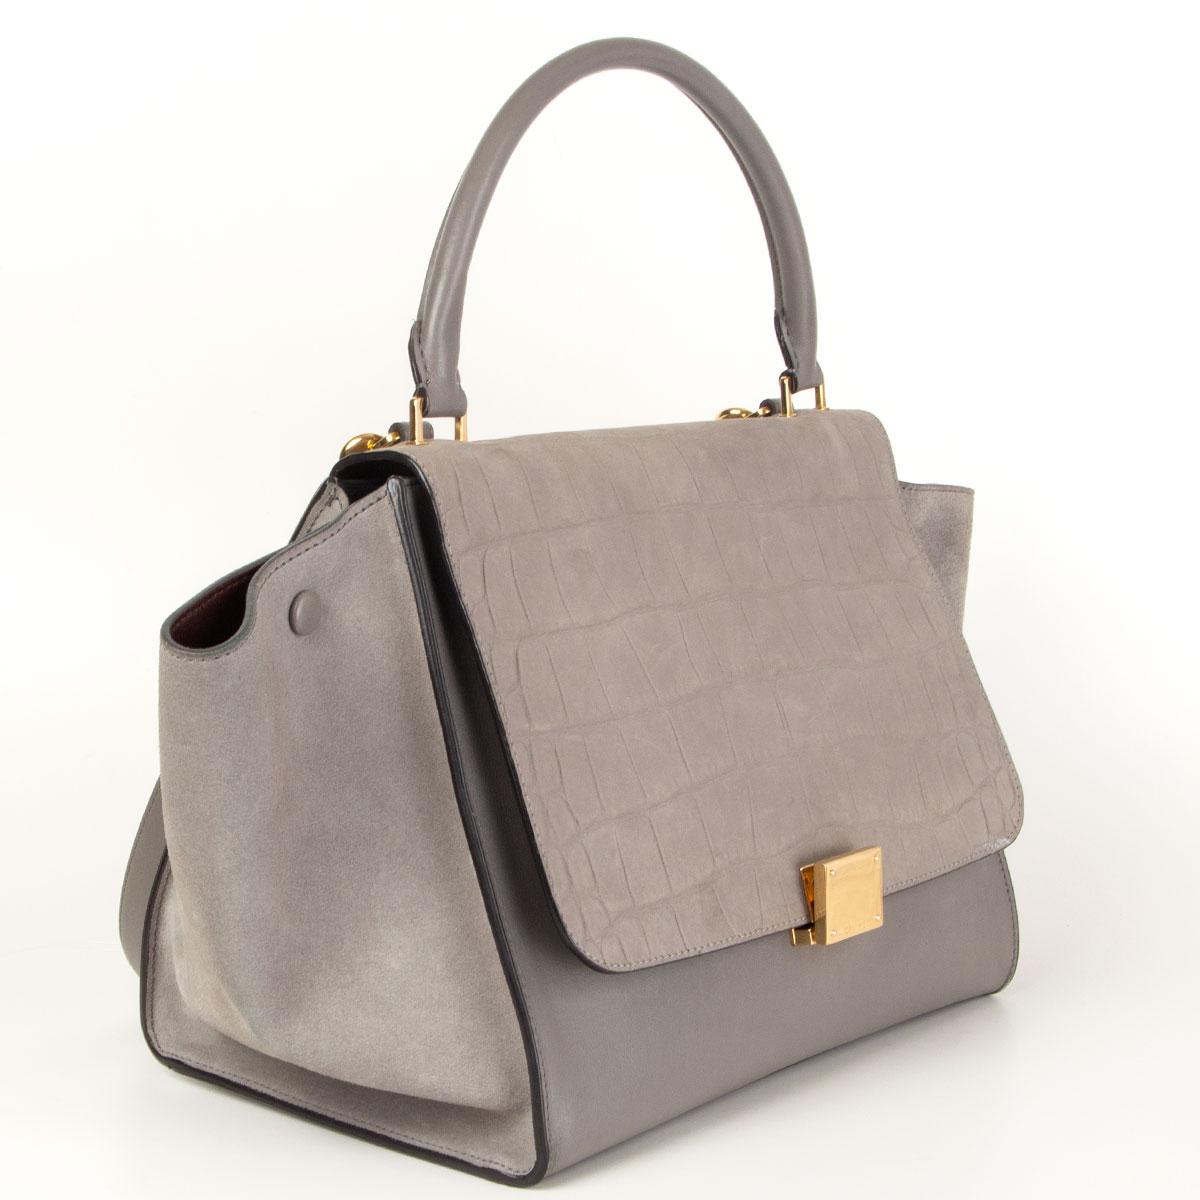 Céline 'Trapeze Medium' shoulder bag in grey calfskin, suede and an crocodile embossed flap. Opens with a zipper on top and is lined in burgundy calfskin with two open pockets against the back. Comes with a detachable shoulder strap. Has been